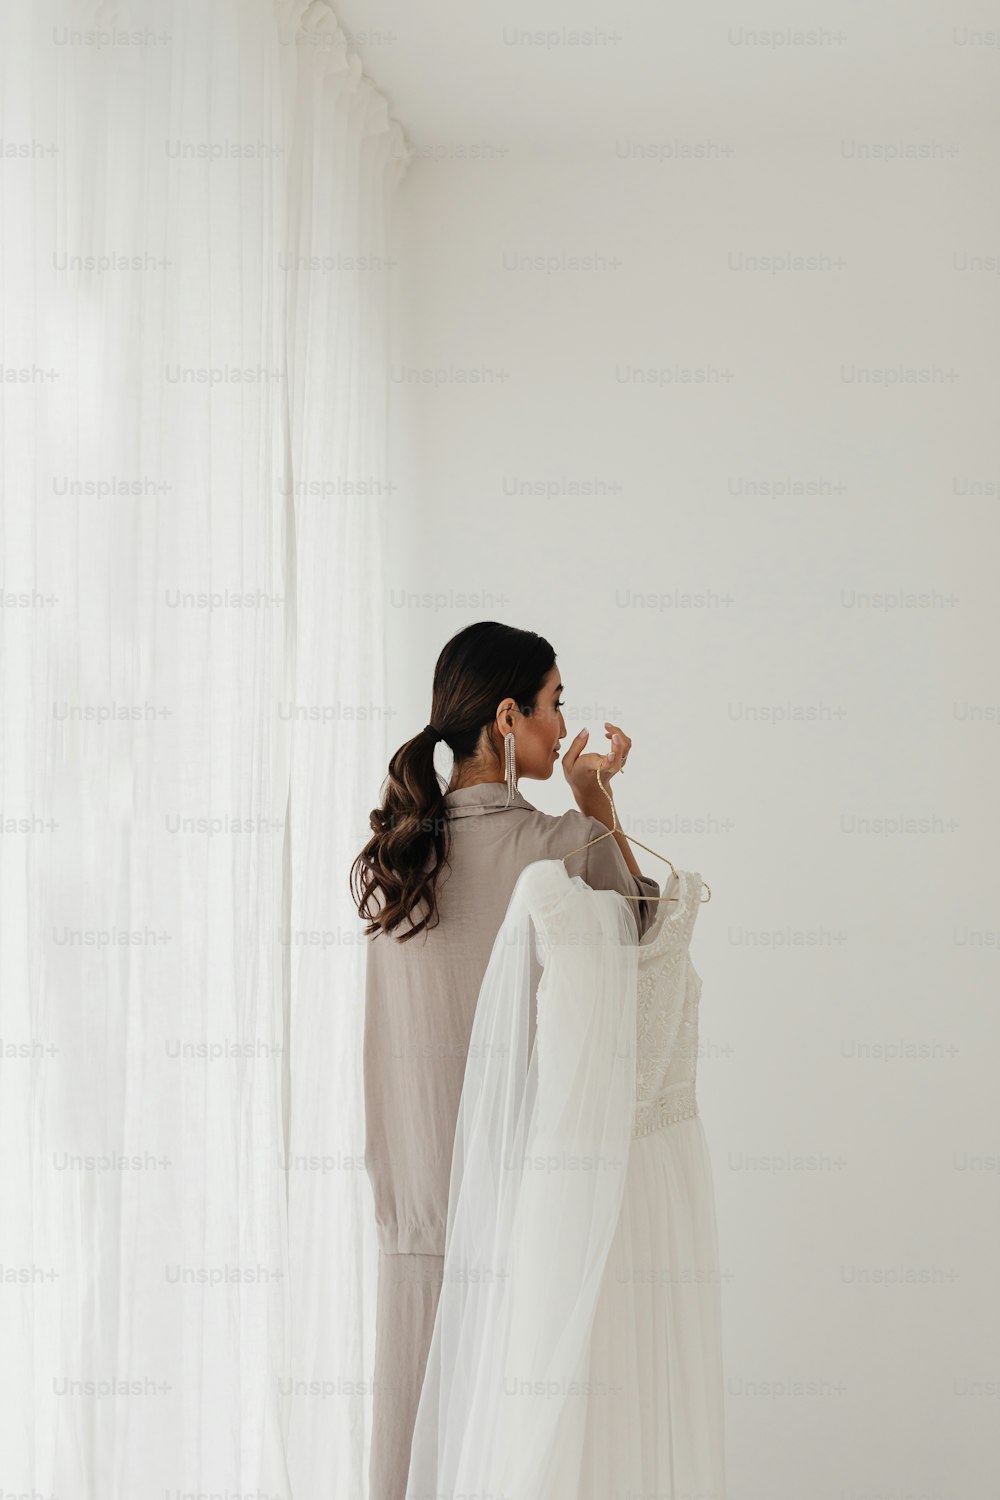 a woman standing in front of a white curtain holding a dress